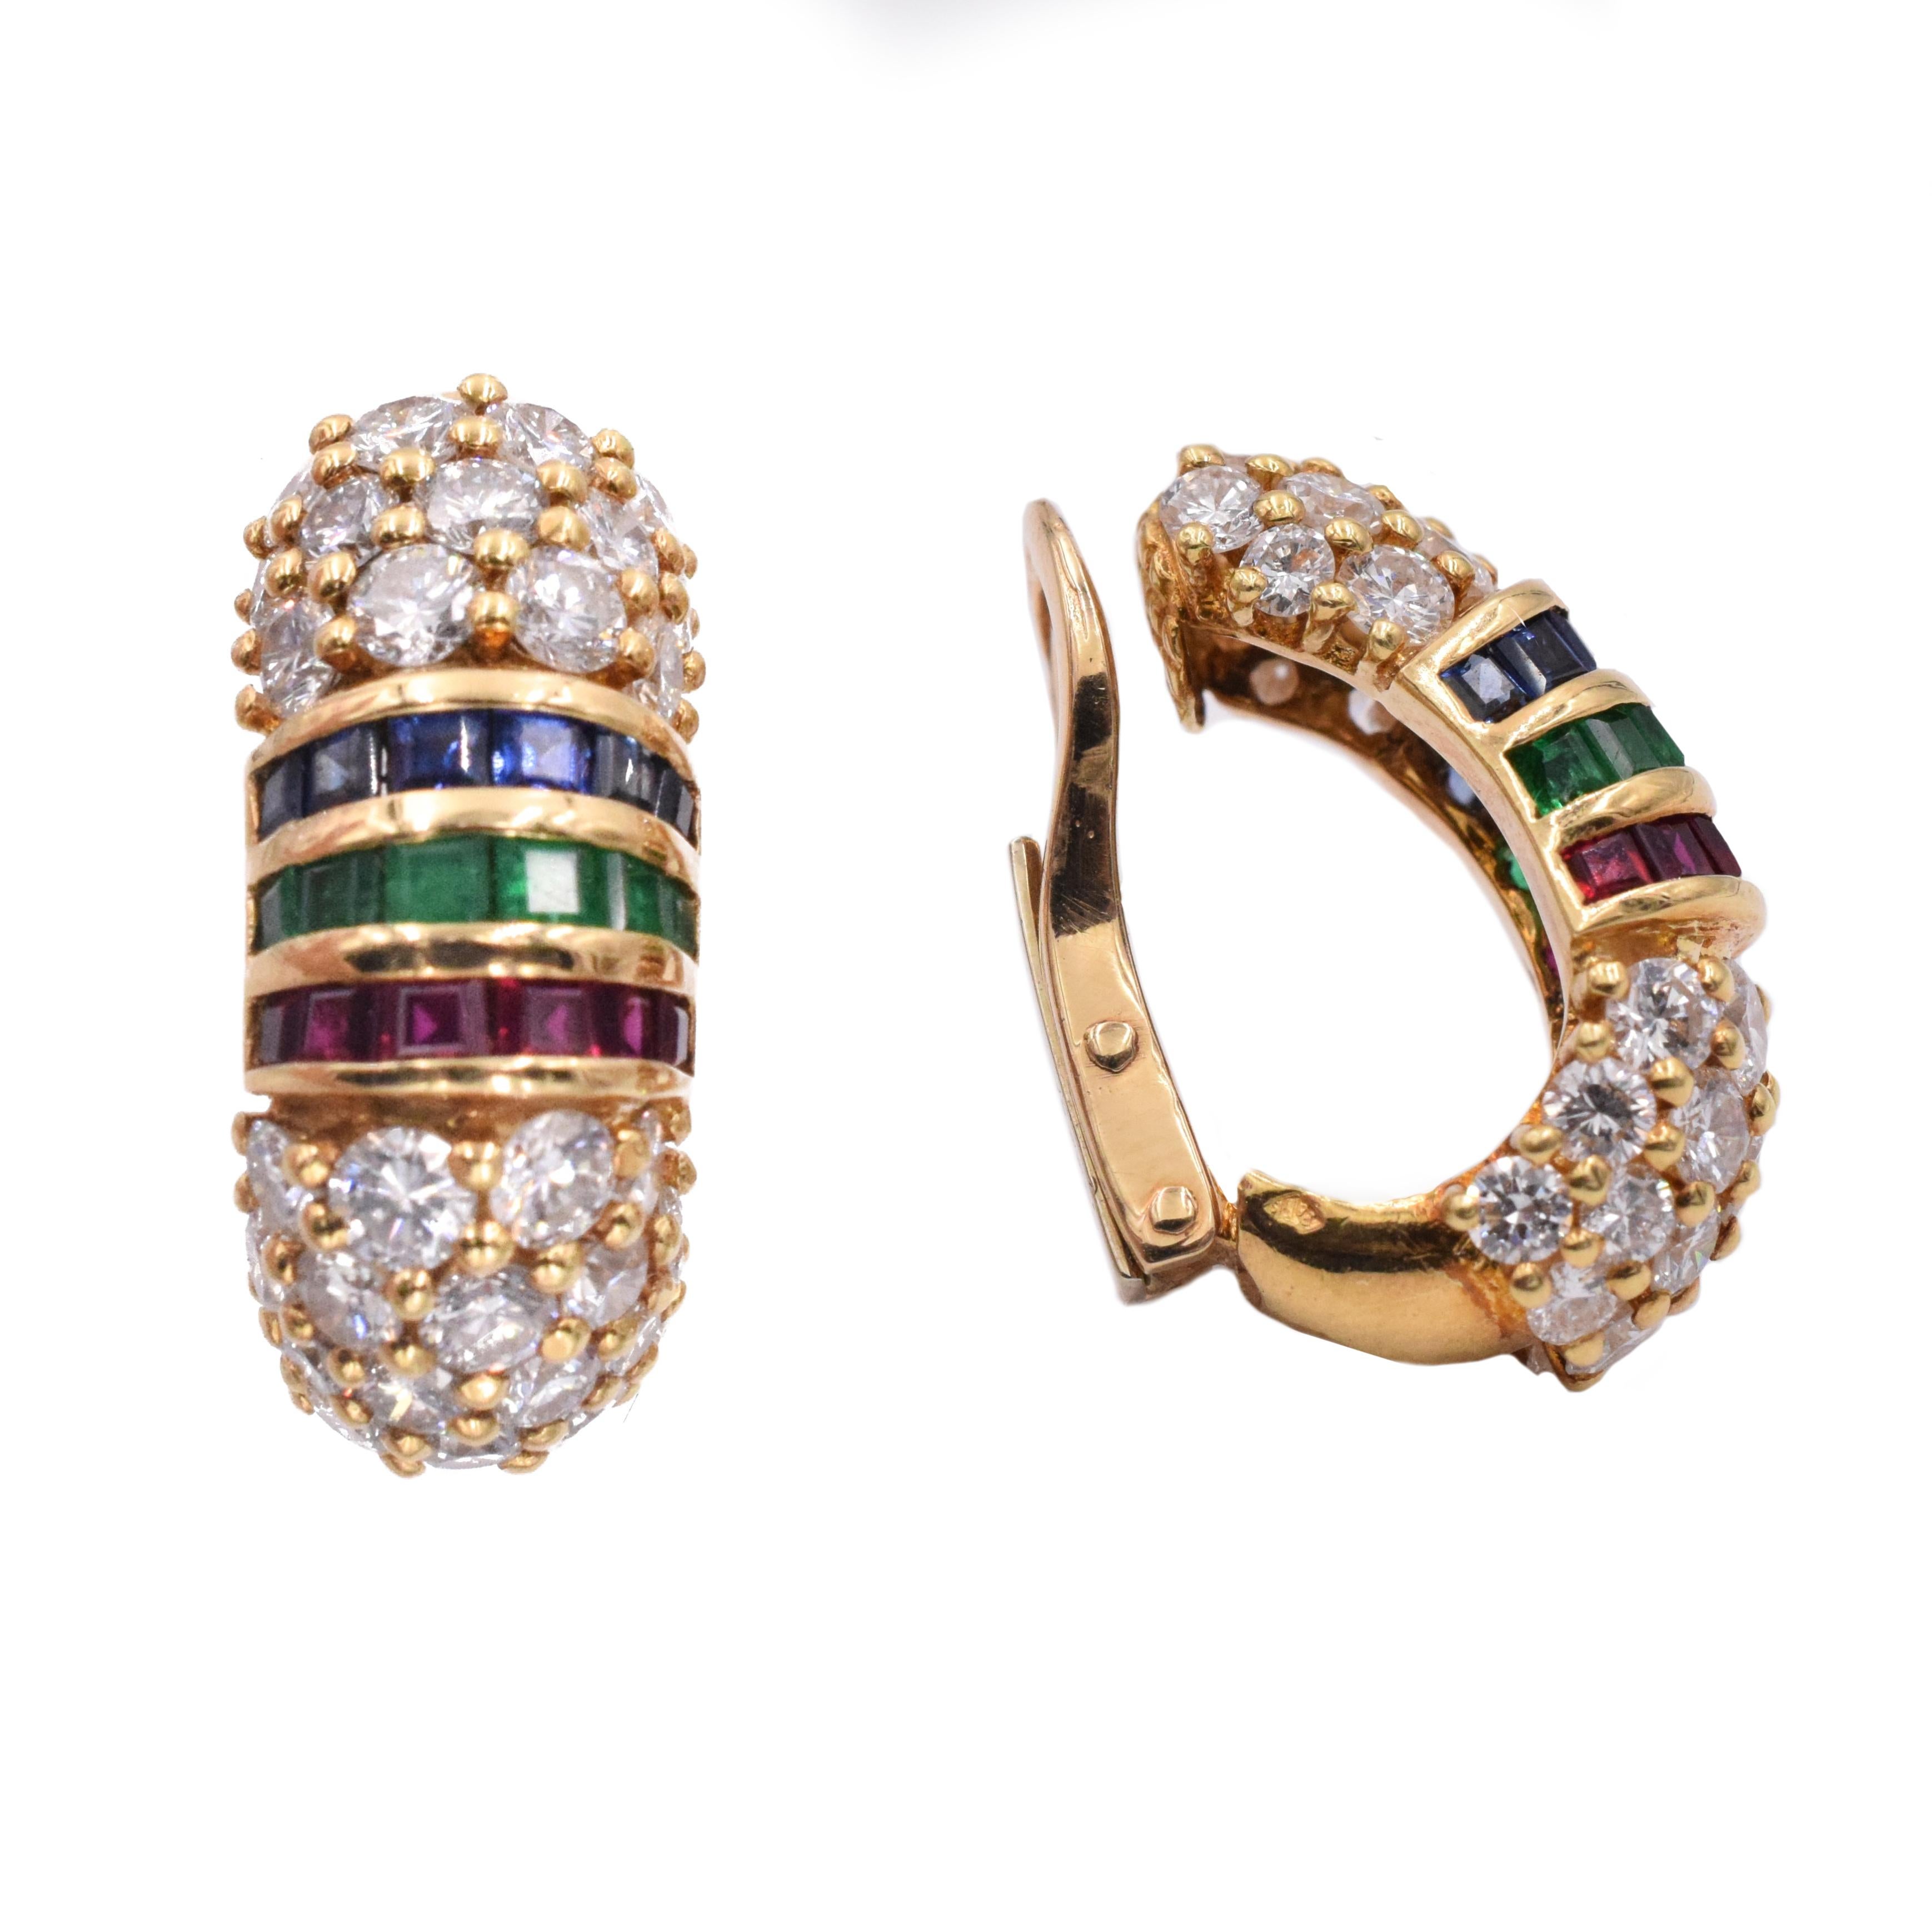 Van Cleef & Arpels diamond, sapphire, ruby and emerald hoop earclip earrings in 18k yellow gold. Pave set with round brilliant cut diamonds 3.5 carats & accented with 3 rows of square cut gemstones with total weight of 2 carats (emeralds, rubies and